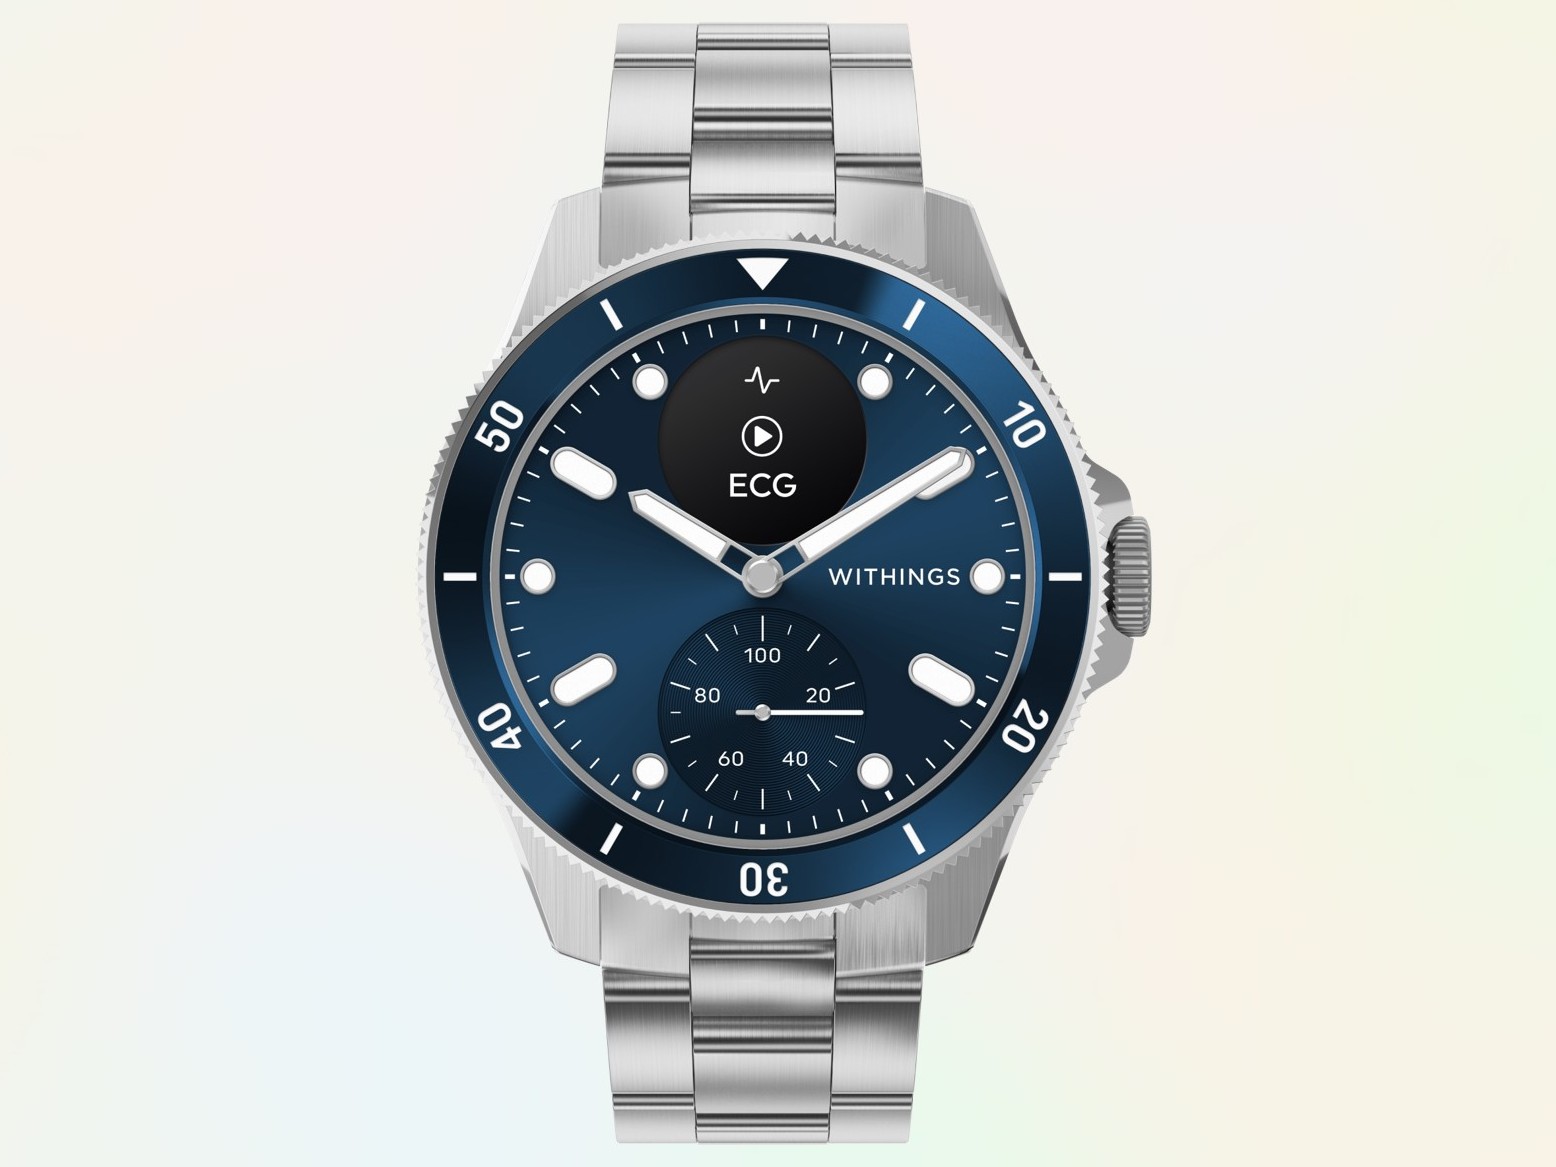 The 42mm Withings ScanWatch Nova Blends Luxury Diver Watch Aesthetics with Advanced Health Tracking Capabilities